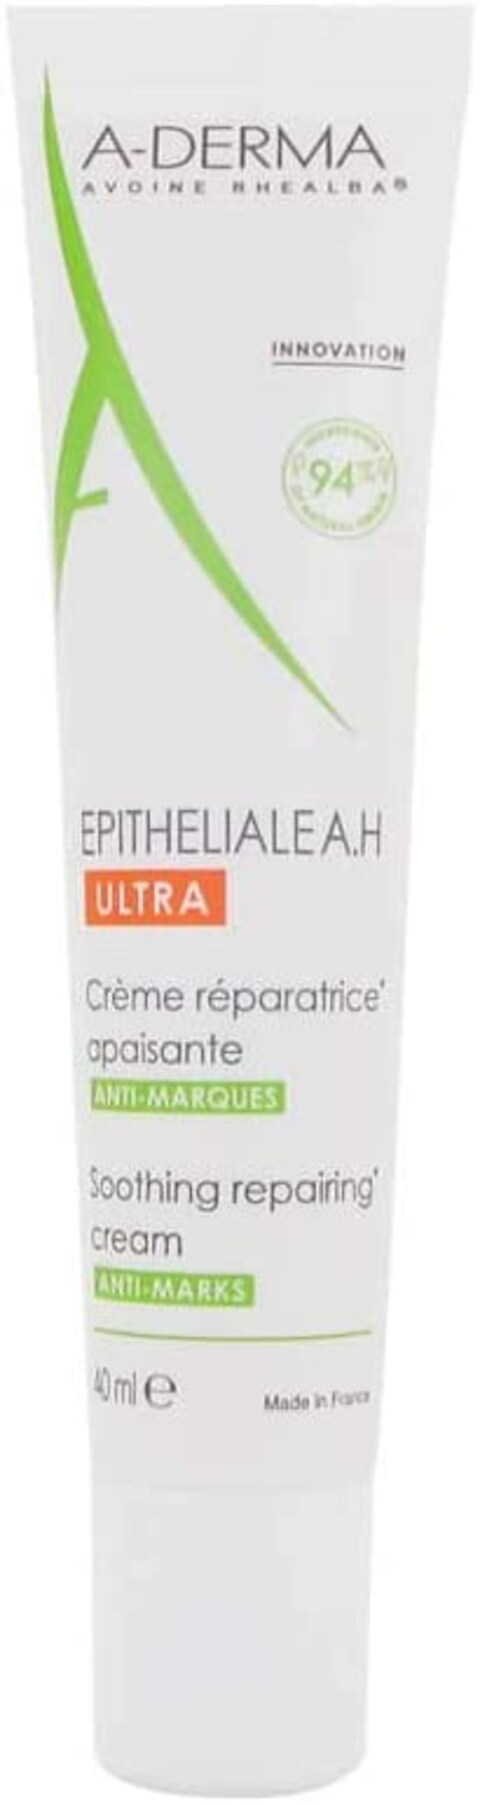 A-Derma Epitheliale A. H Ultra Soothing Repairing Cream - 40ml